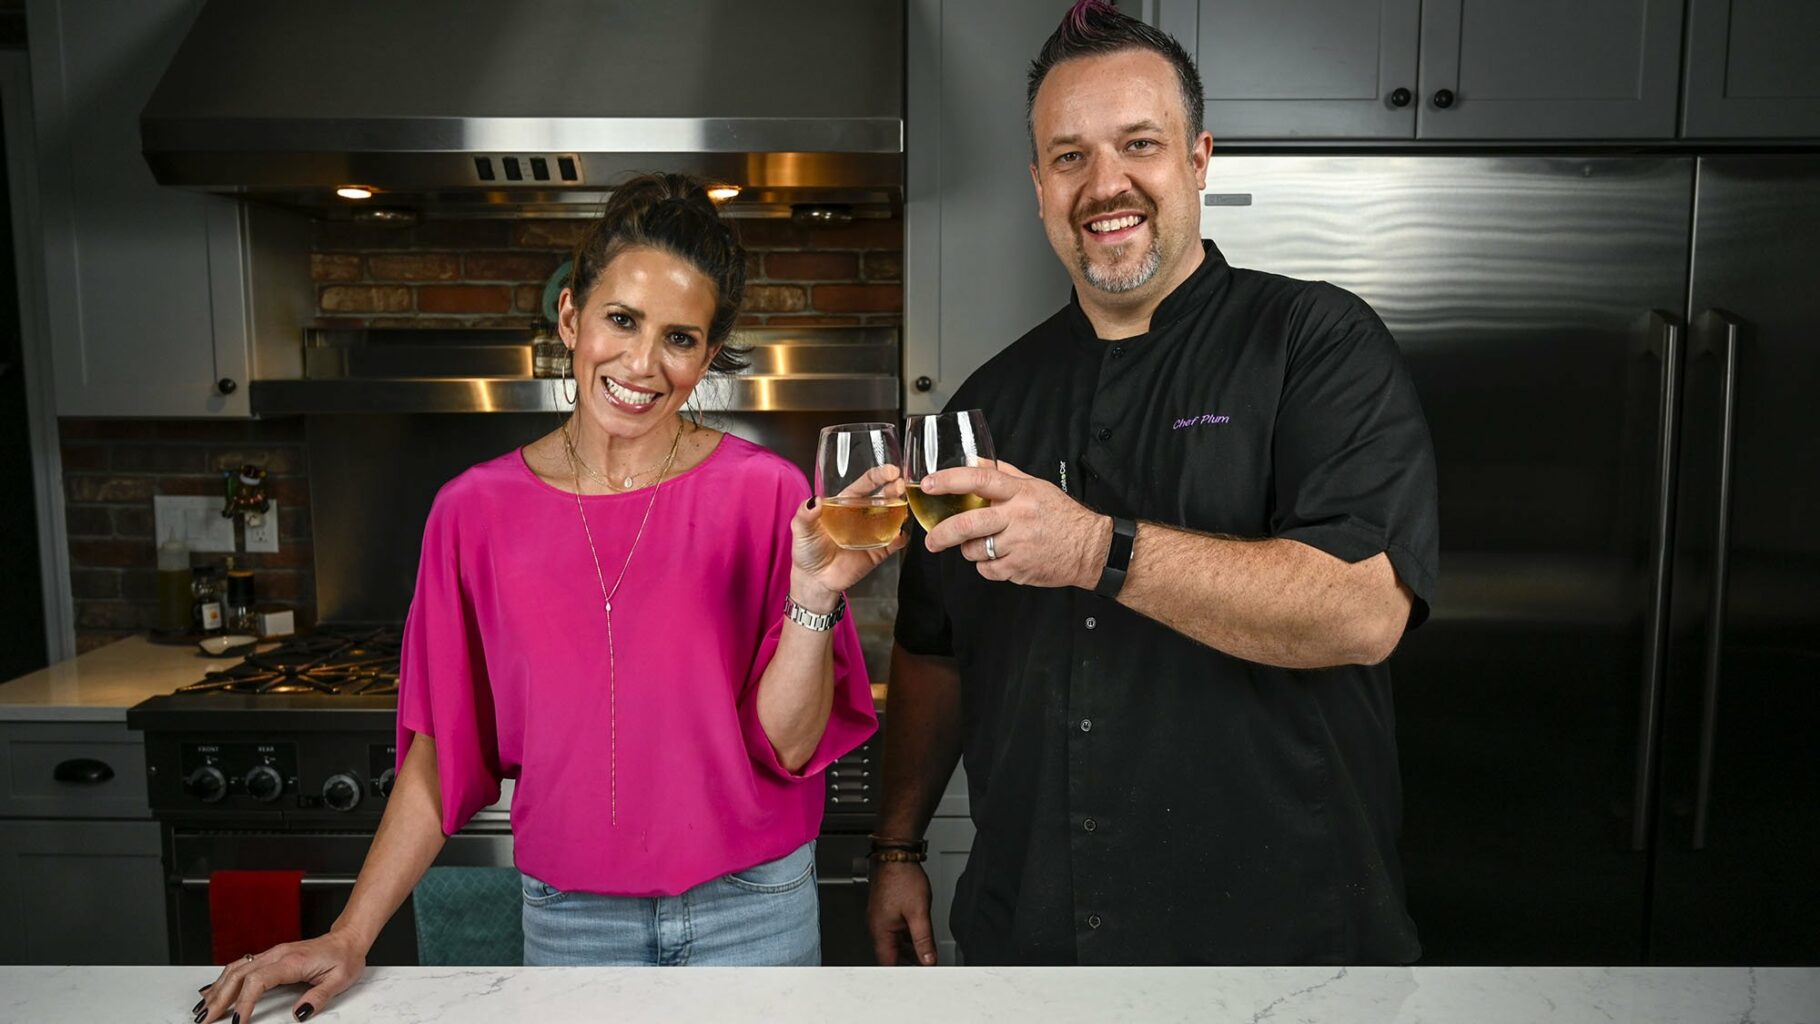 NEWTOWN, CT -  December 3, 2020: Production for Cutline Staying Connected Through Food with Marysol Castro and Chef Plum from Seasoned. Marysol and Chef pose for a Champagne toast. (Julianne Varacchi/Connecticut Public)